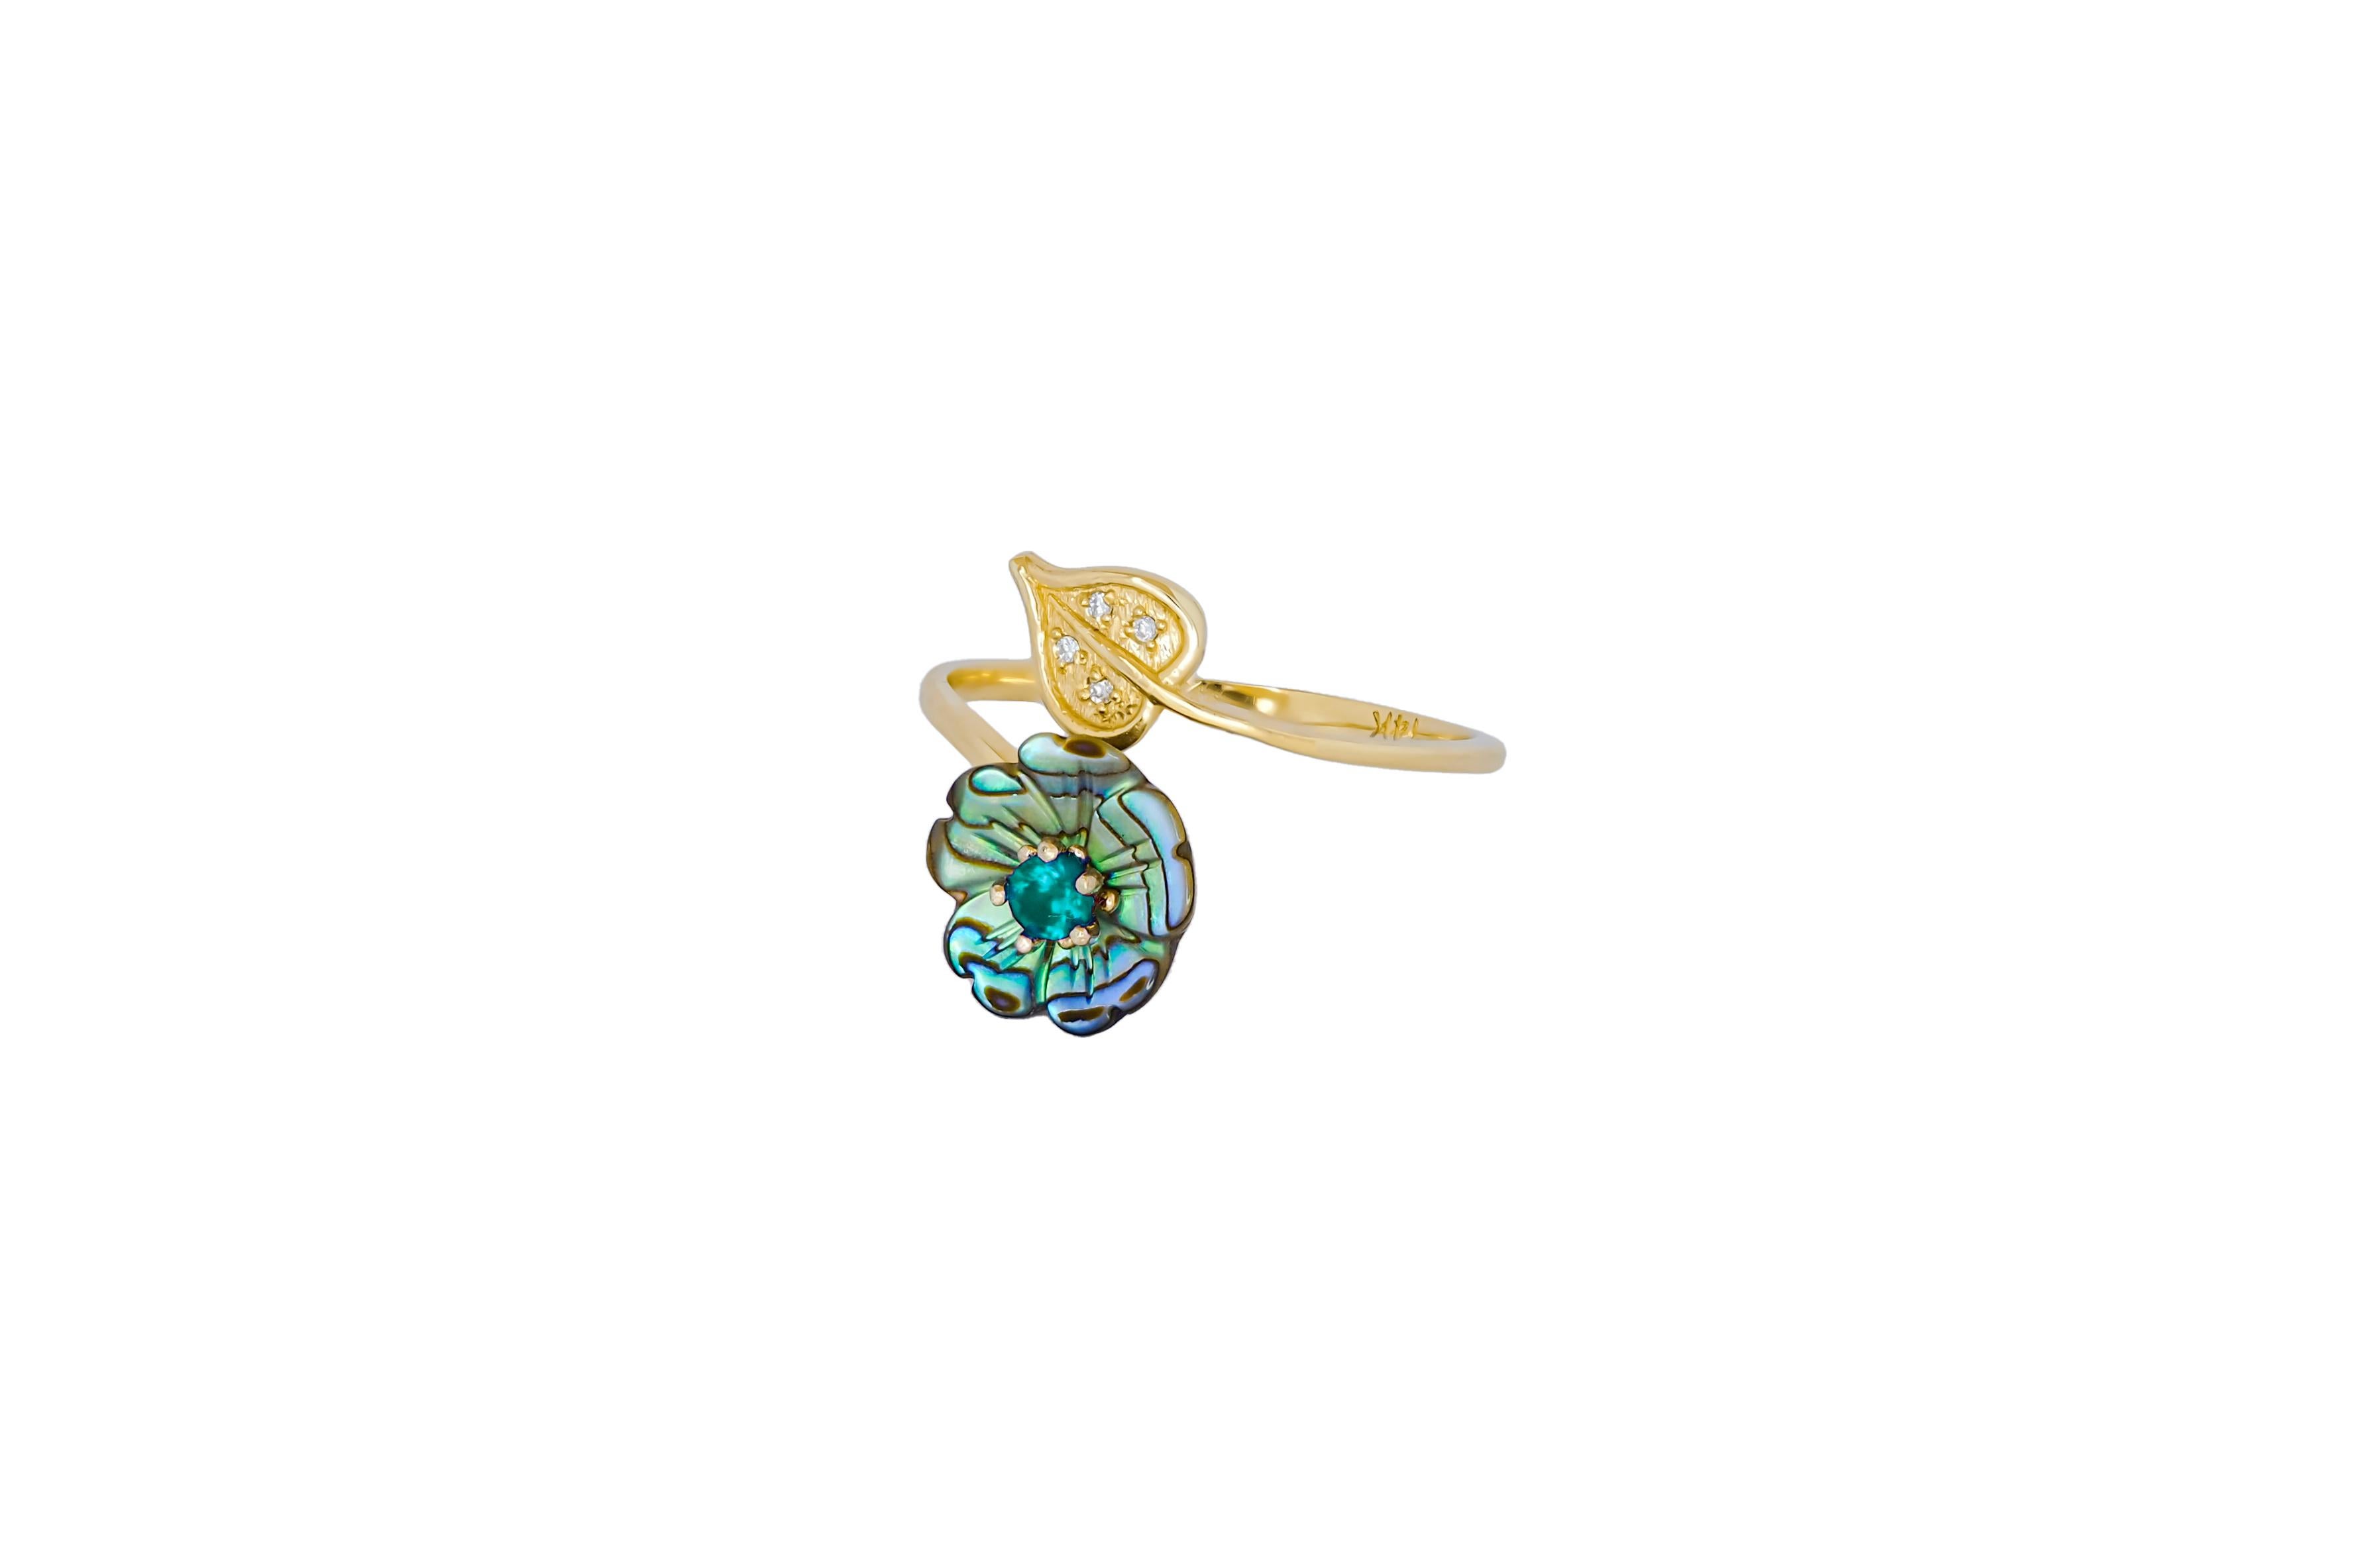 Women's Paraiba gold ring. For Sale